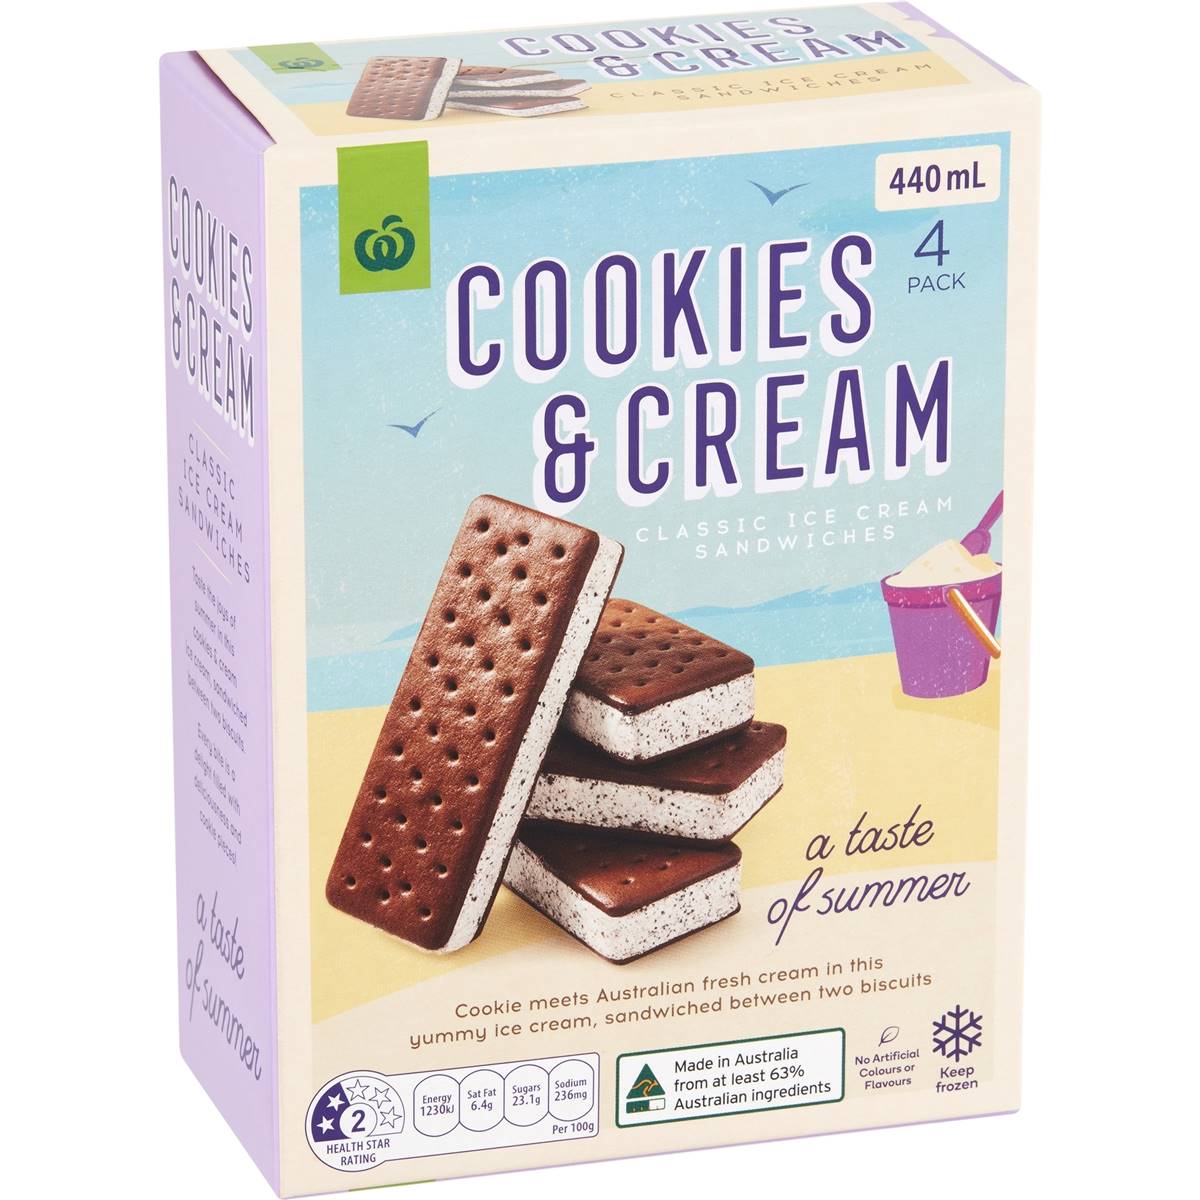 Calories in Woolworths Cookies & Cream Ice Cream Sandwich